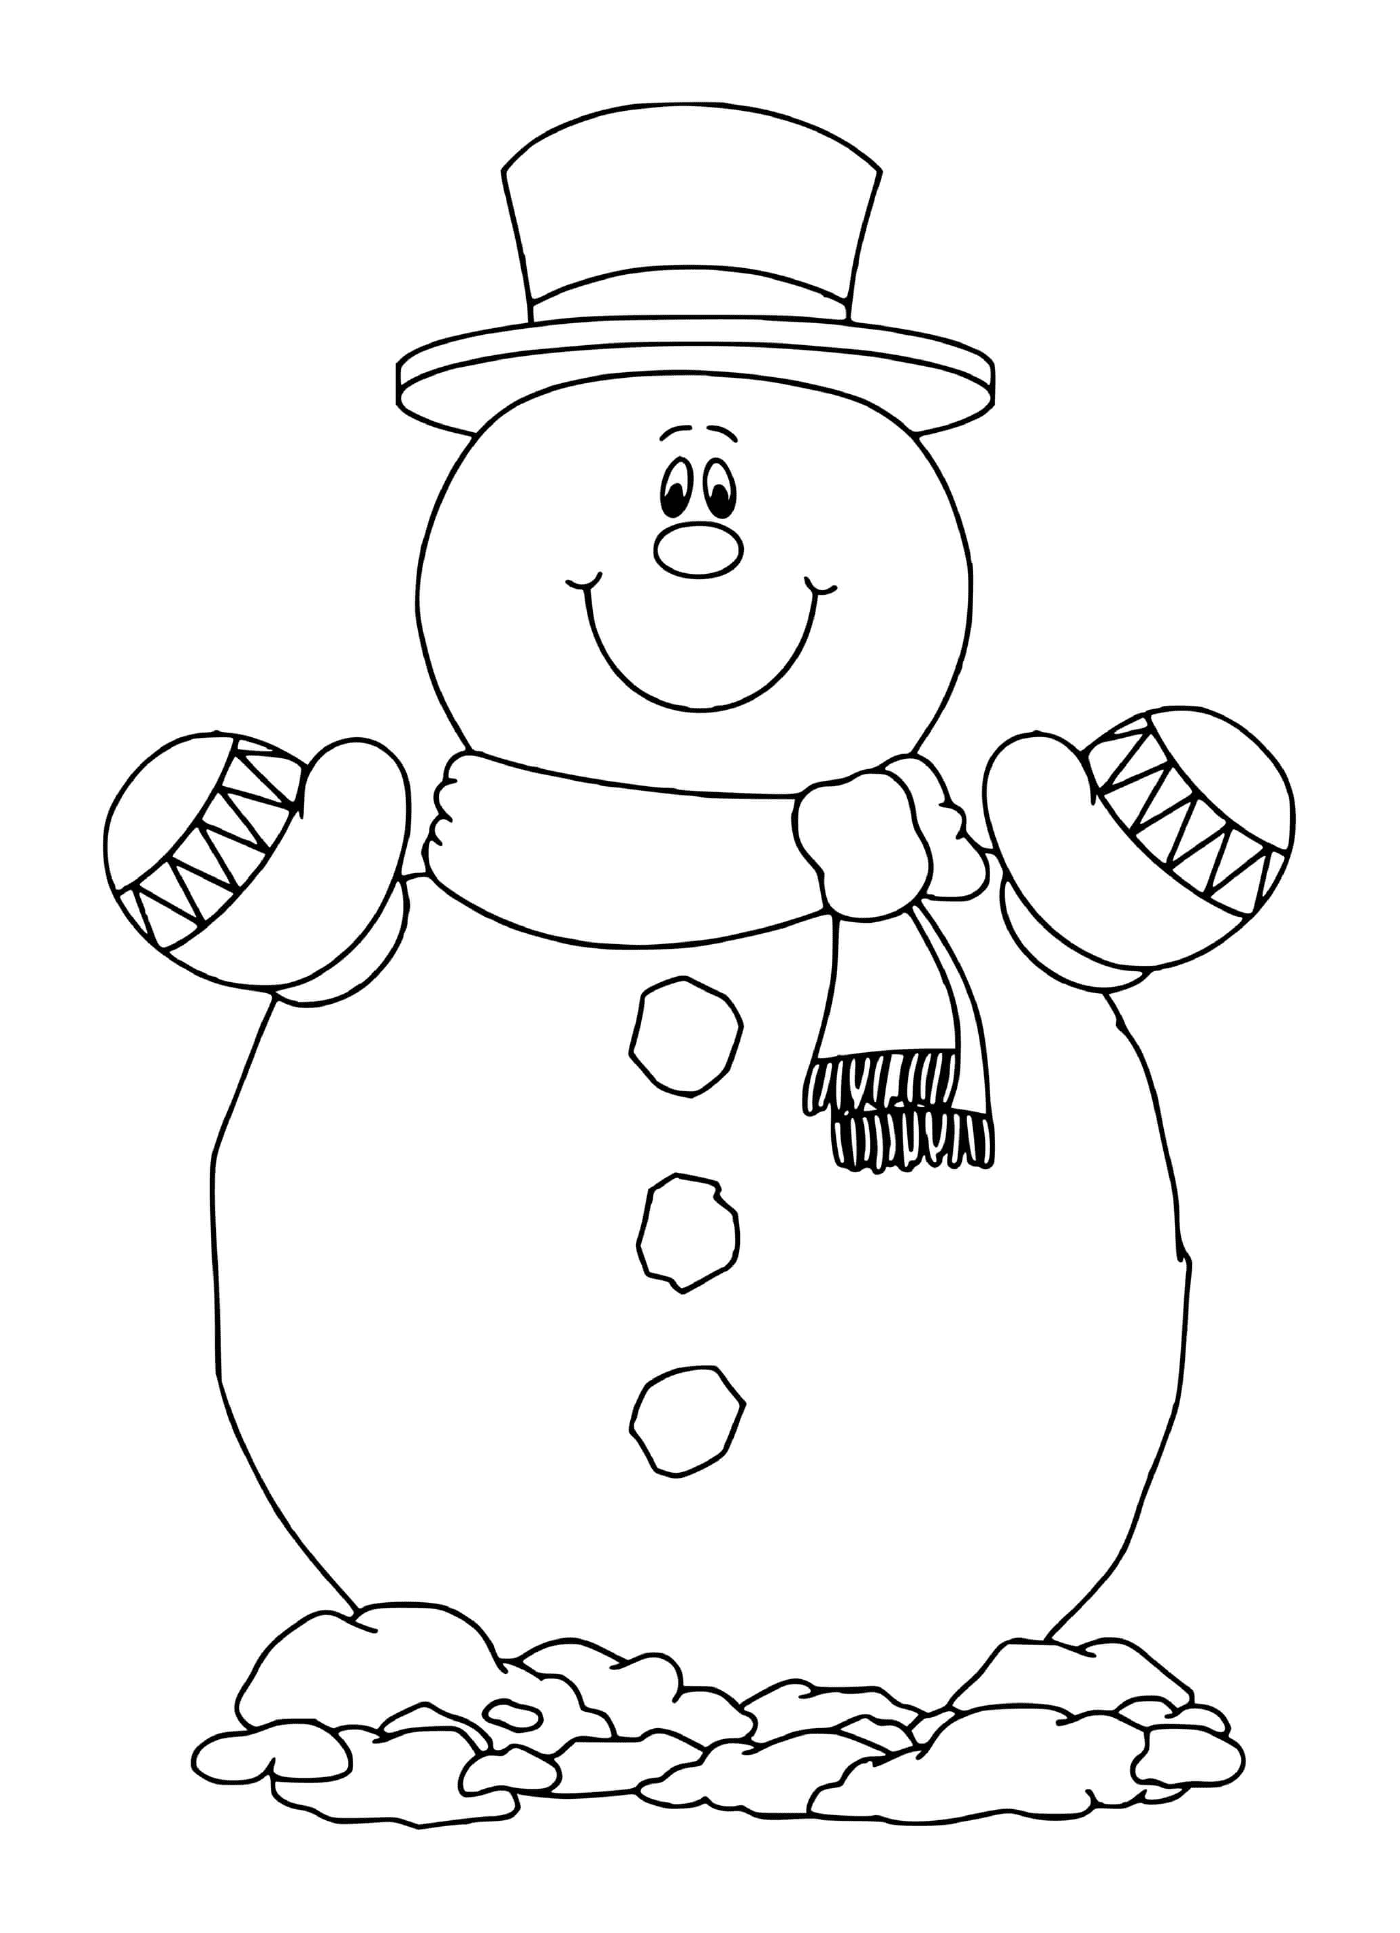  Classic snowman with a smile 